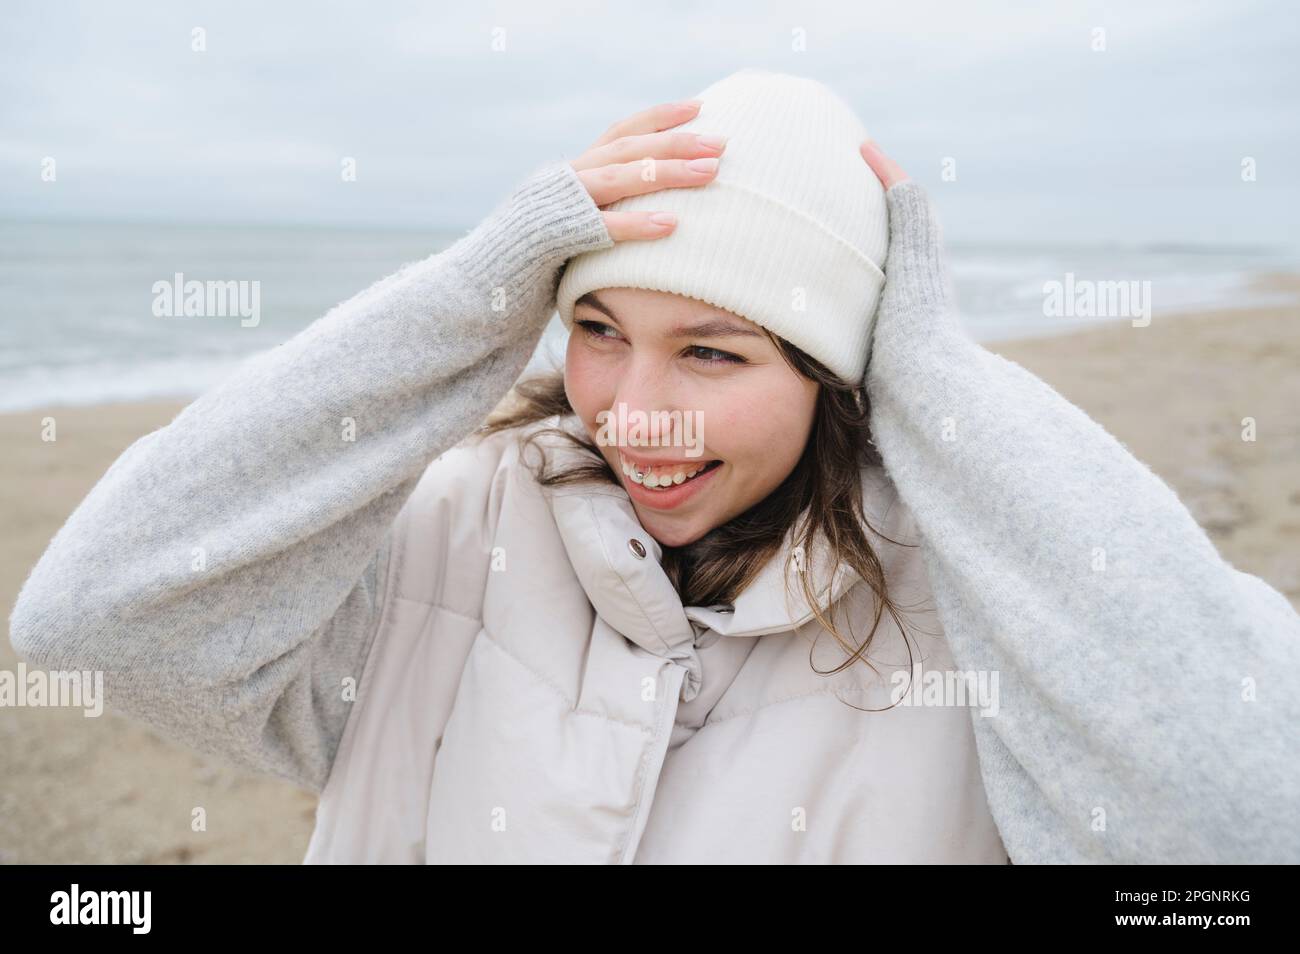 Happy woman adjusting knit hat at beach Stock Photo